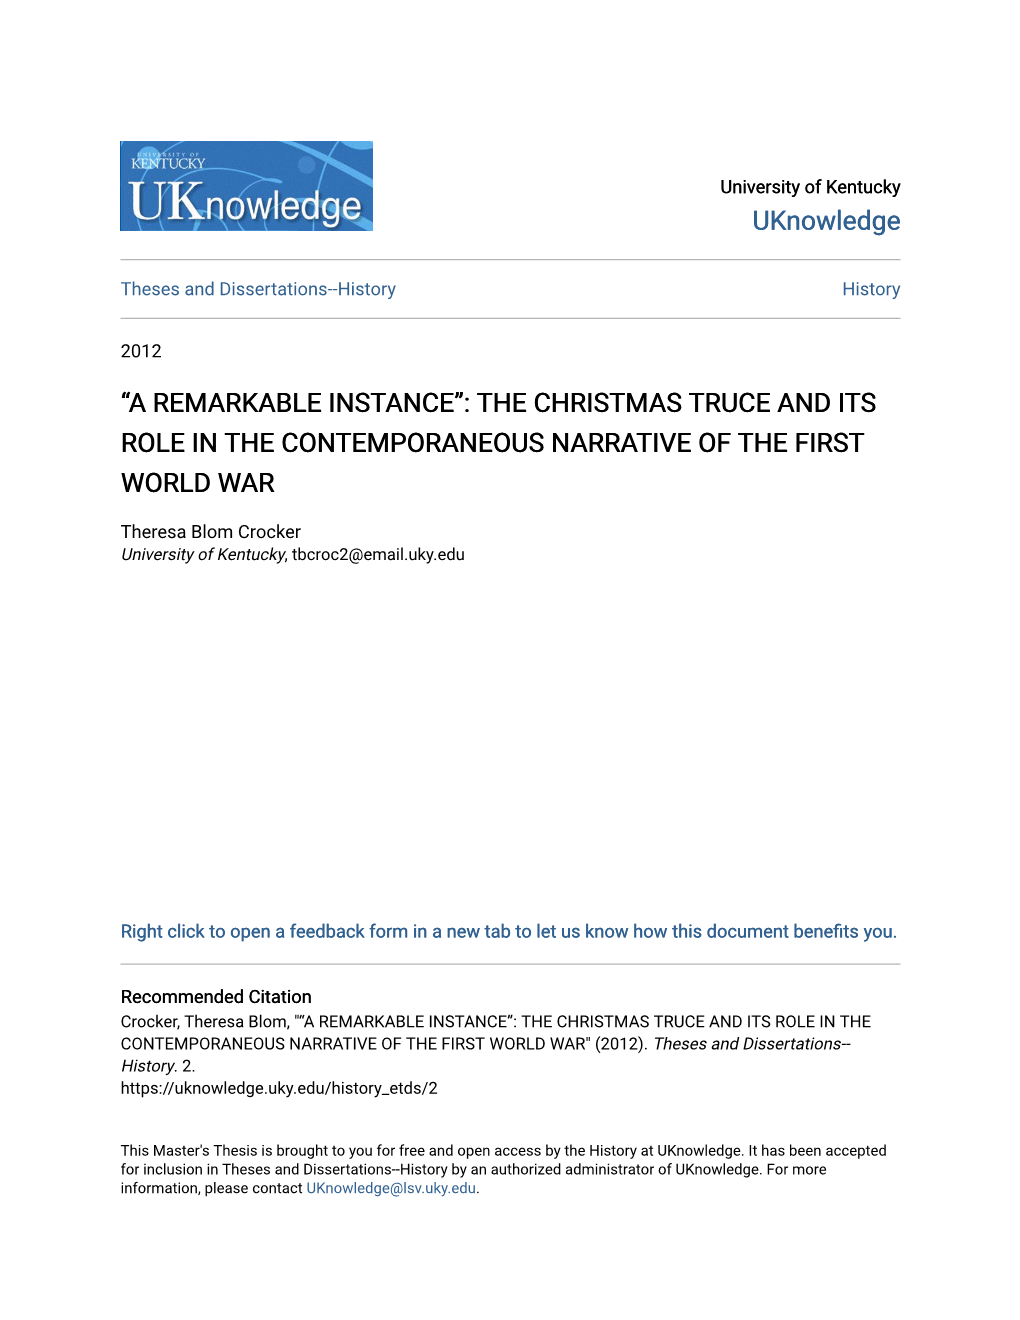 The Christmas Truce and Its Role in the Contemporaneous Narrative of the First World War